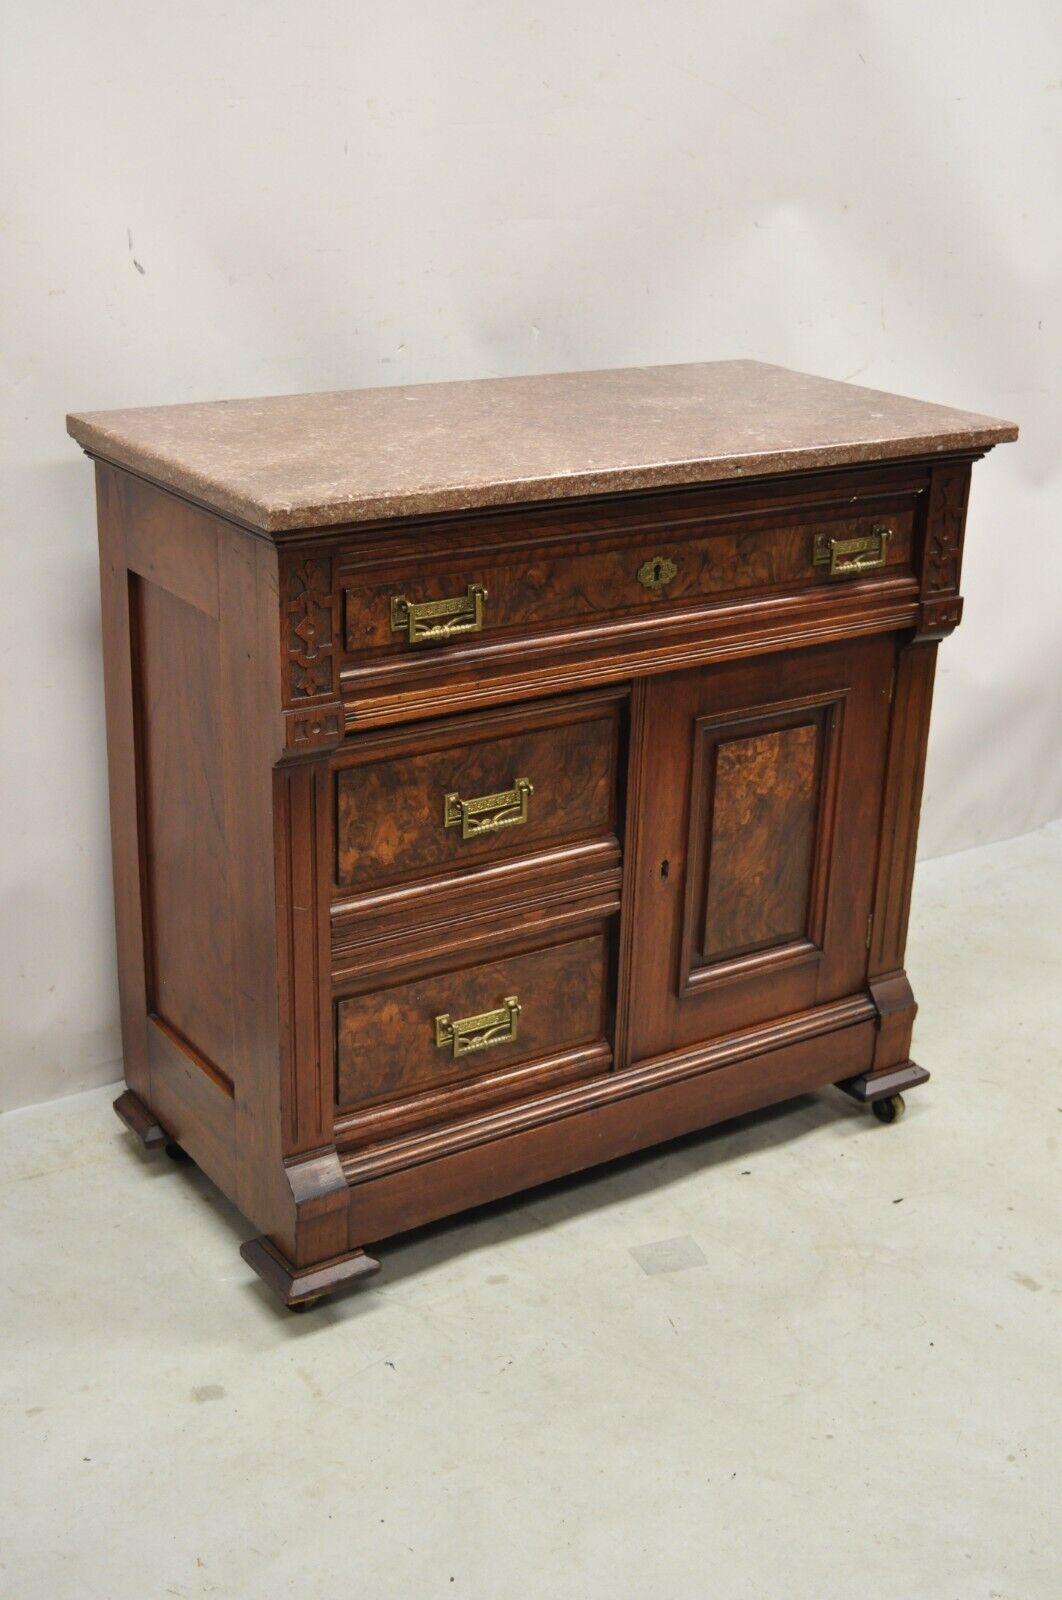 Antique Eastlake Victorian Burlwood Walnut Marble Top Washstand Nightstand Commode. Item features a marble top, beautiful woodgrain, nicely carved details, 1 swing doors, 3 drawers, very nice antique item. Circa 19th Century. Measurements: 31